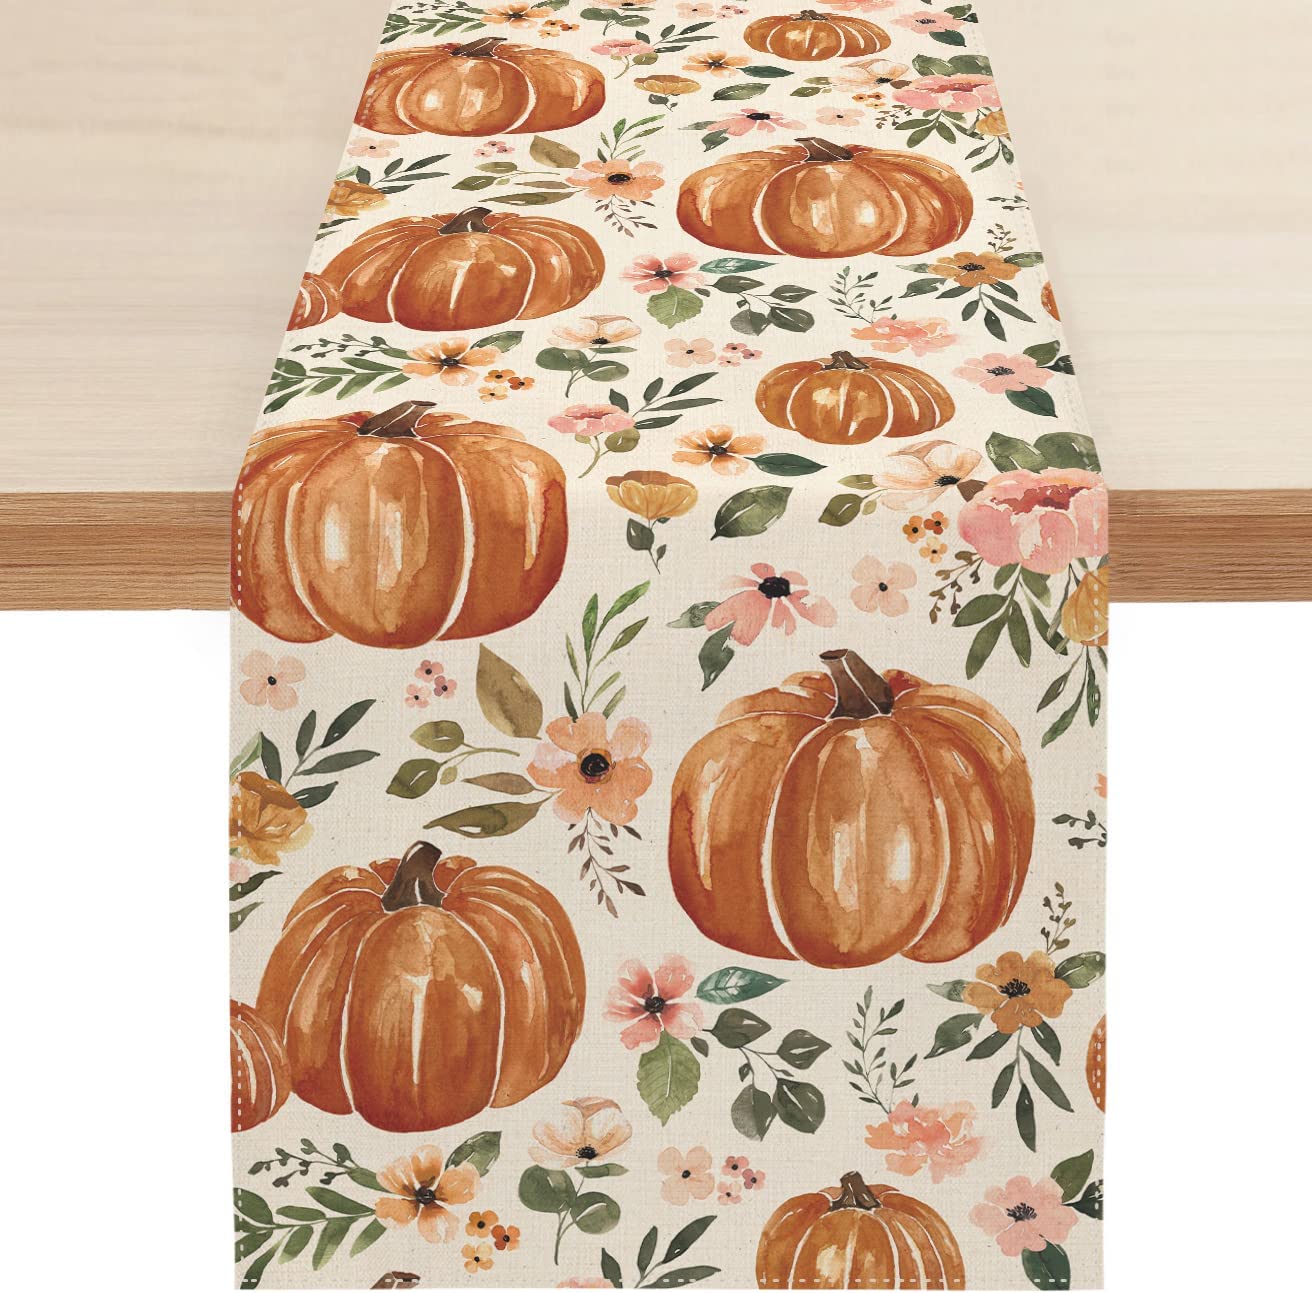 13 x 72 Inches Pumpkin Table Runner Floral Table Runners